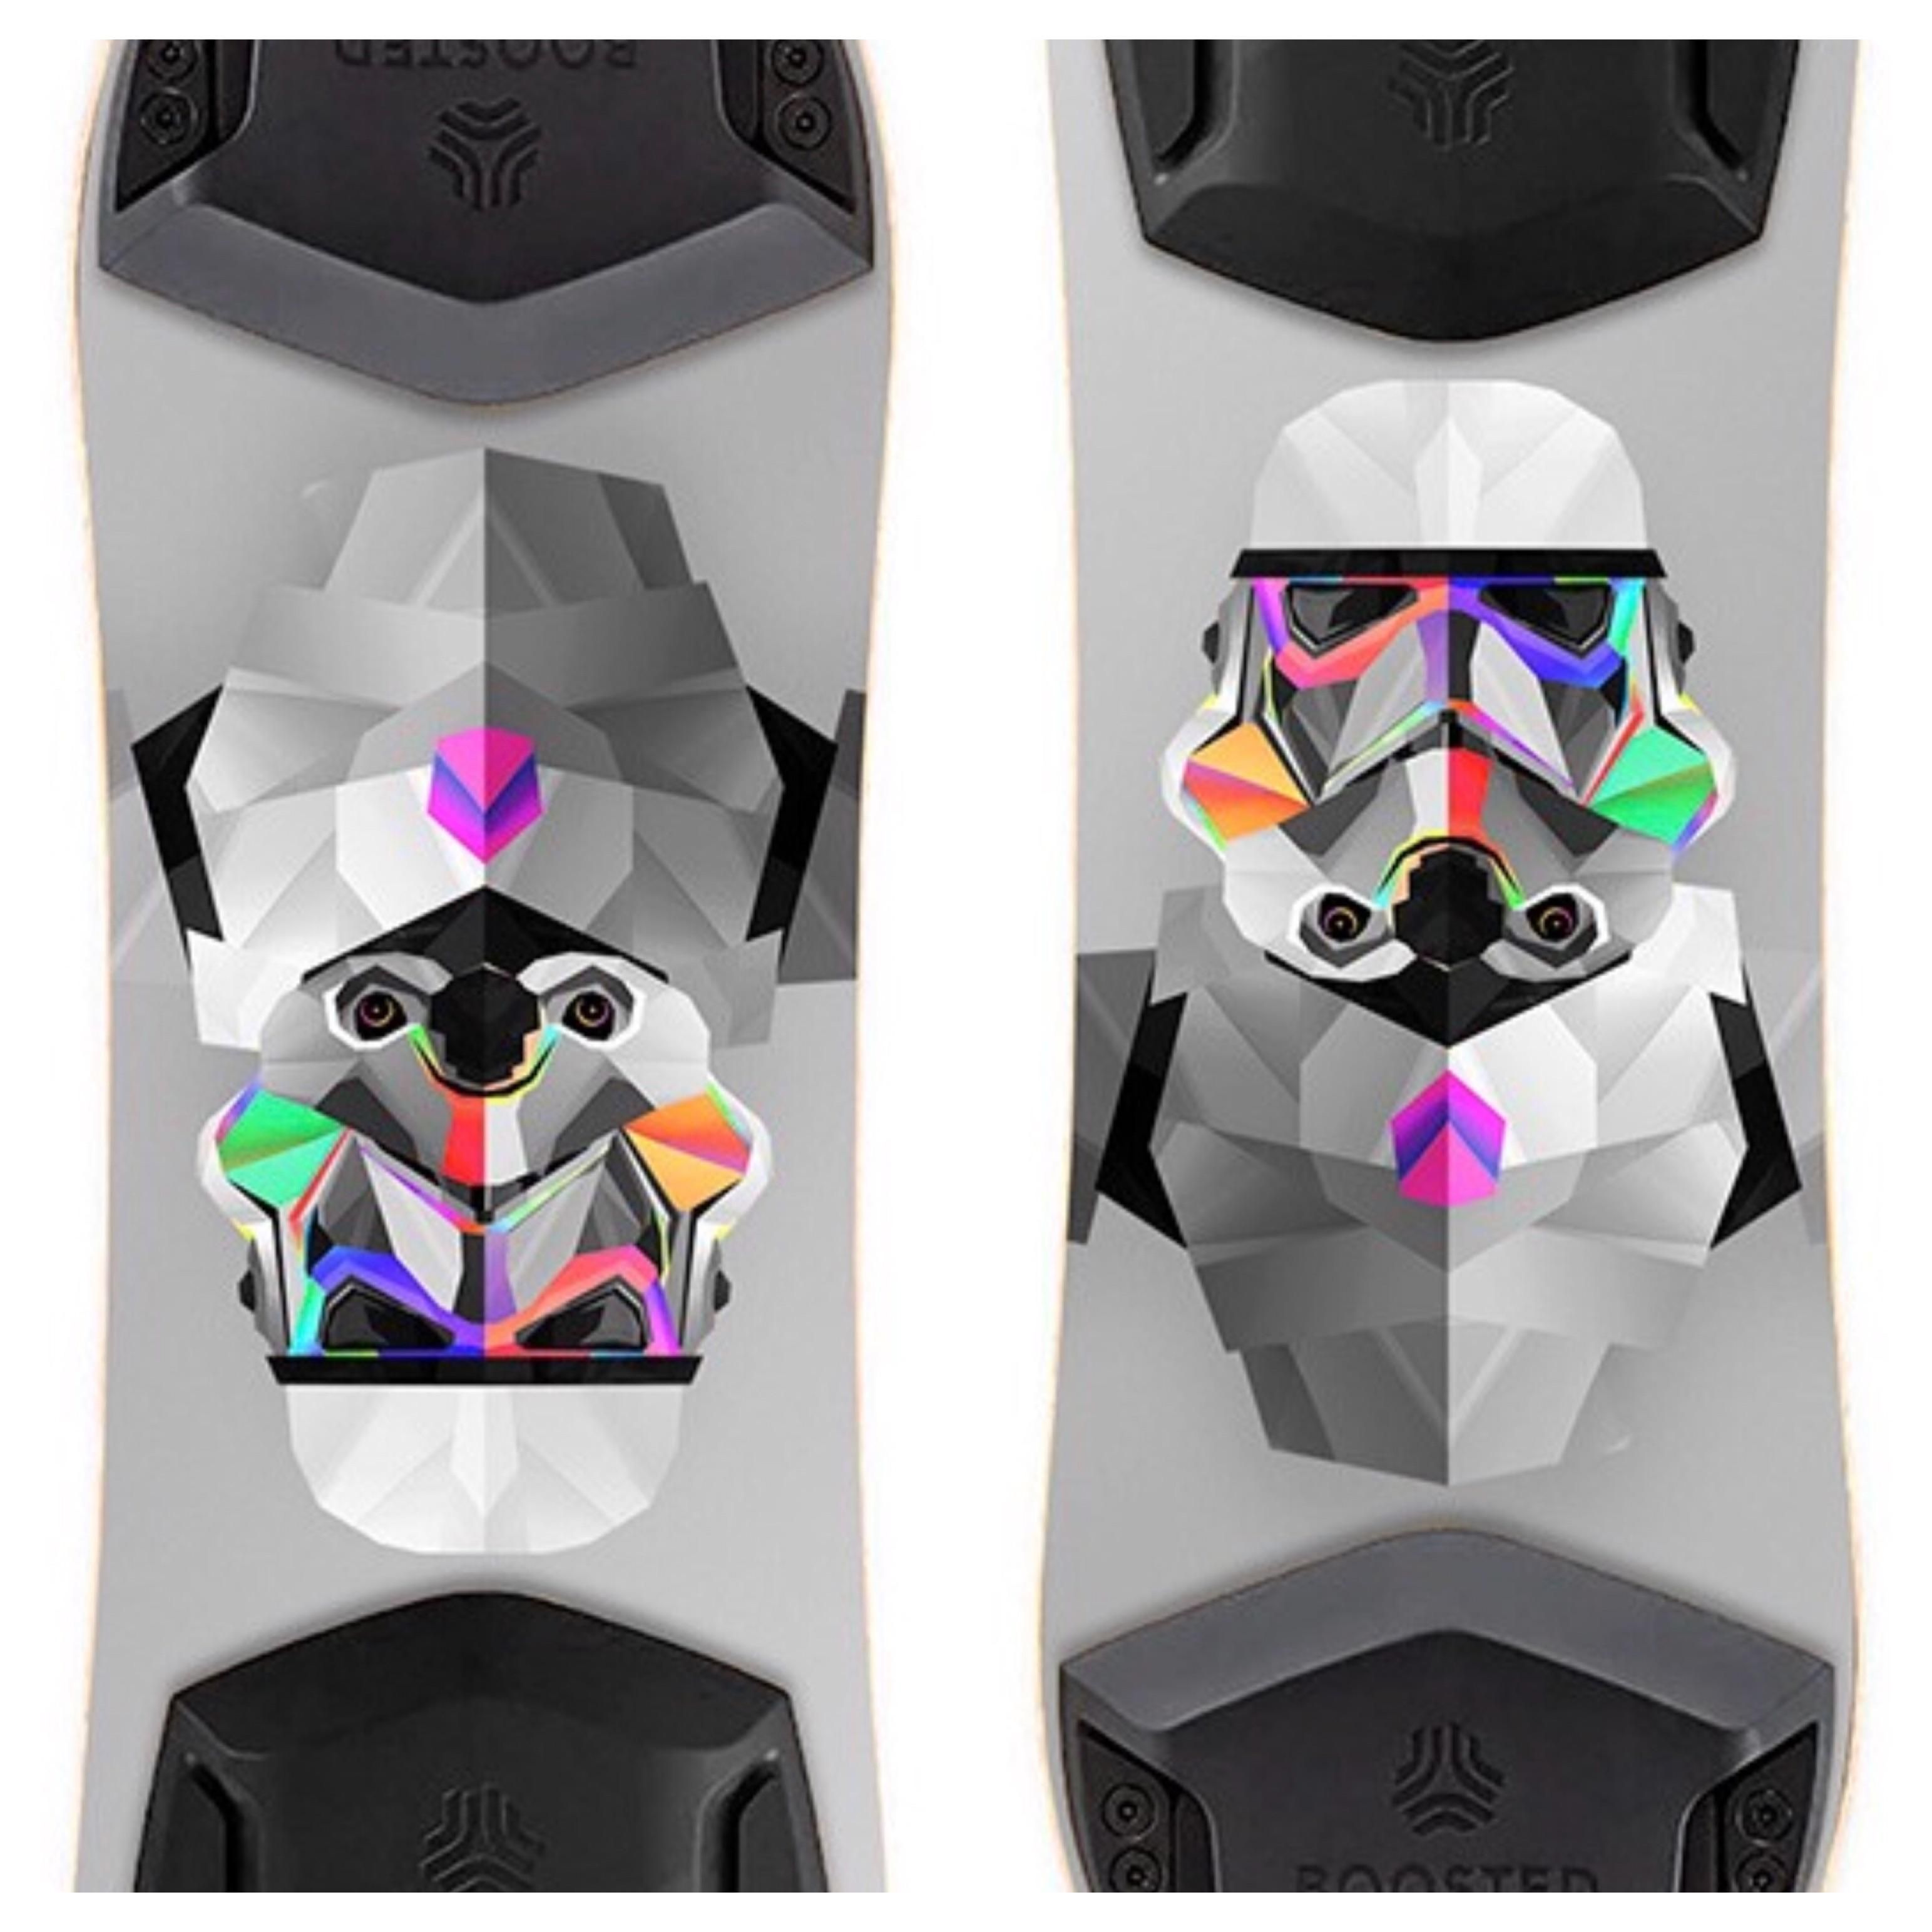 This is a sticker for a Boosted Board that I got for my son for Christmas. He opened it upside down and said “hey cool, a koala with a turban!”